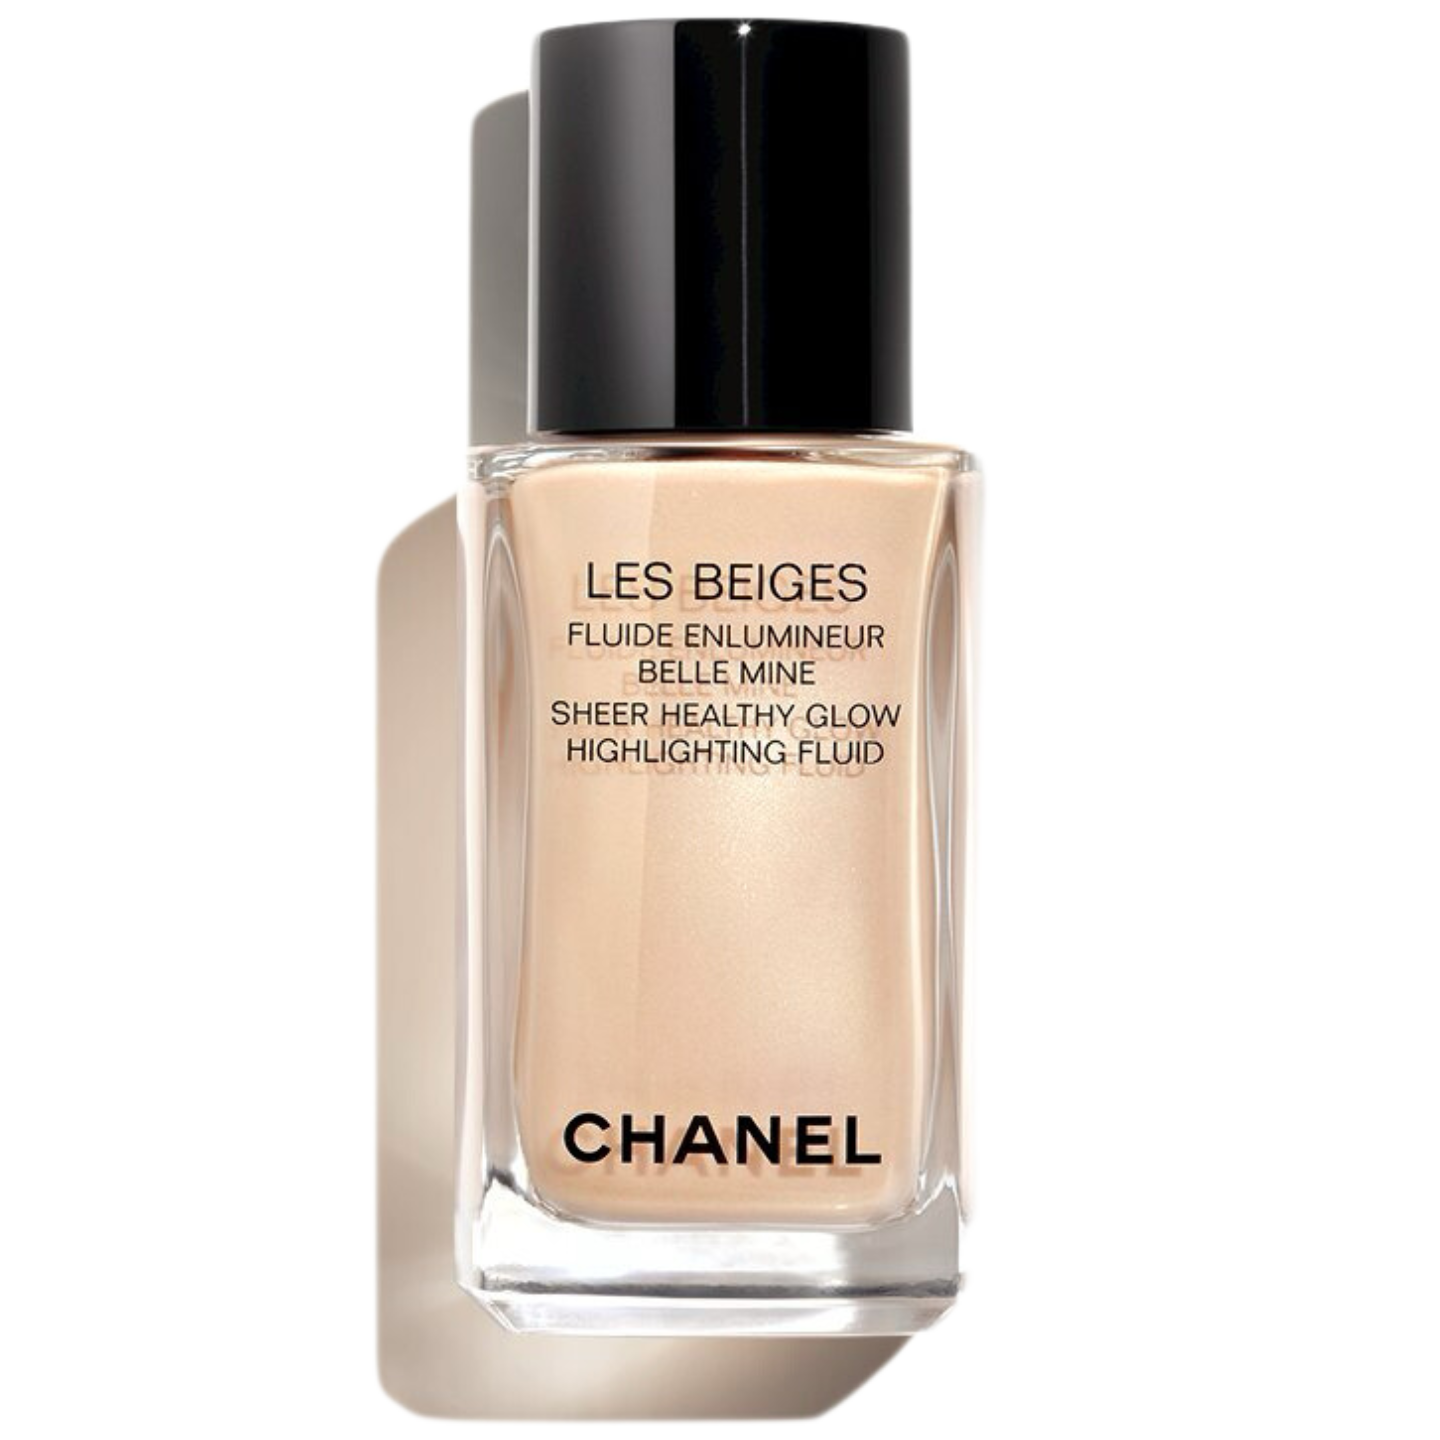 Chanel Les Beiges Healthy Glow Highlighting Fluid